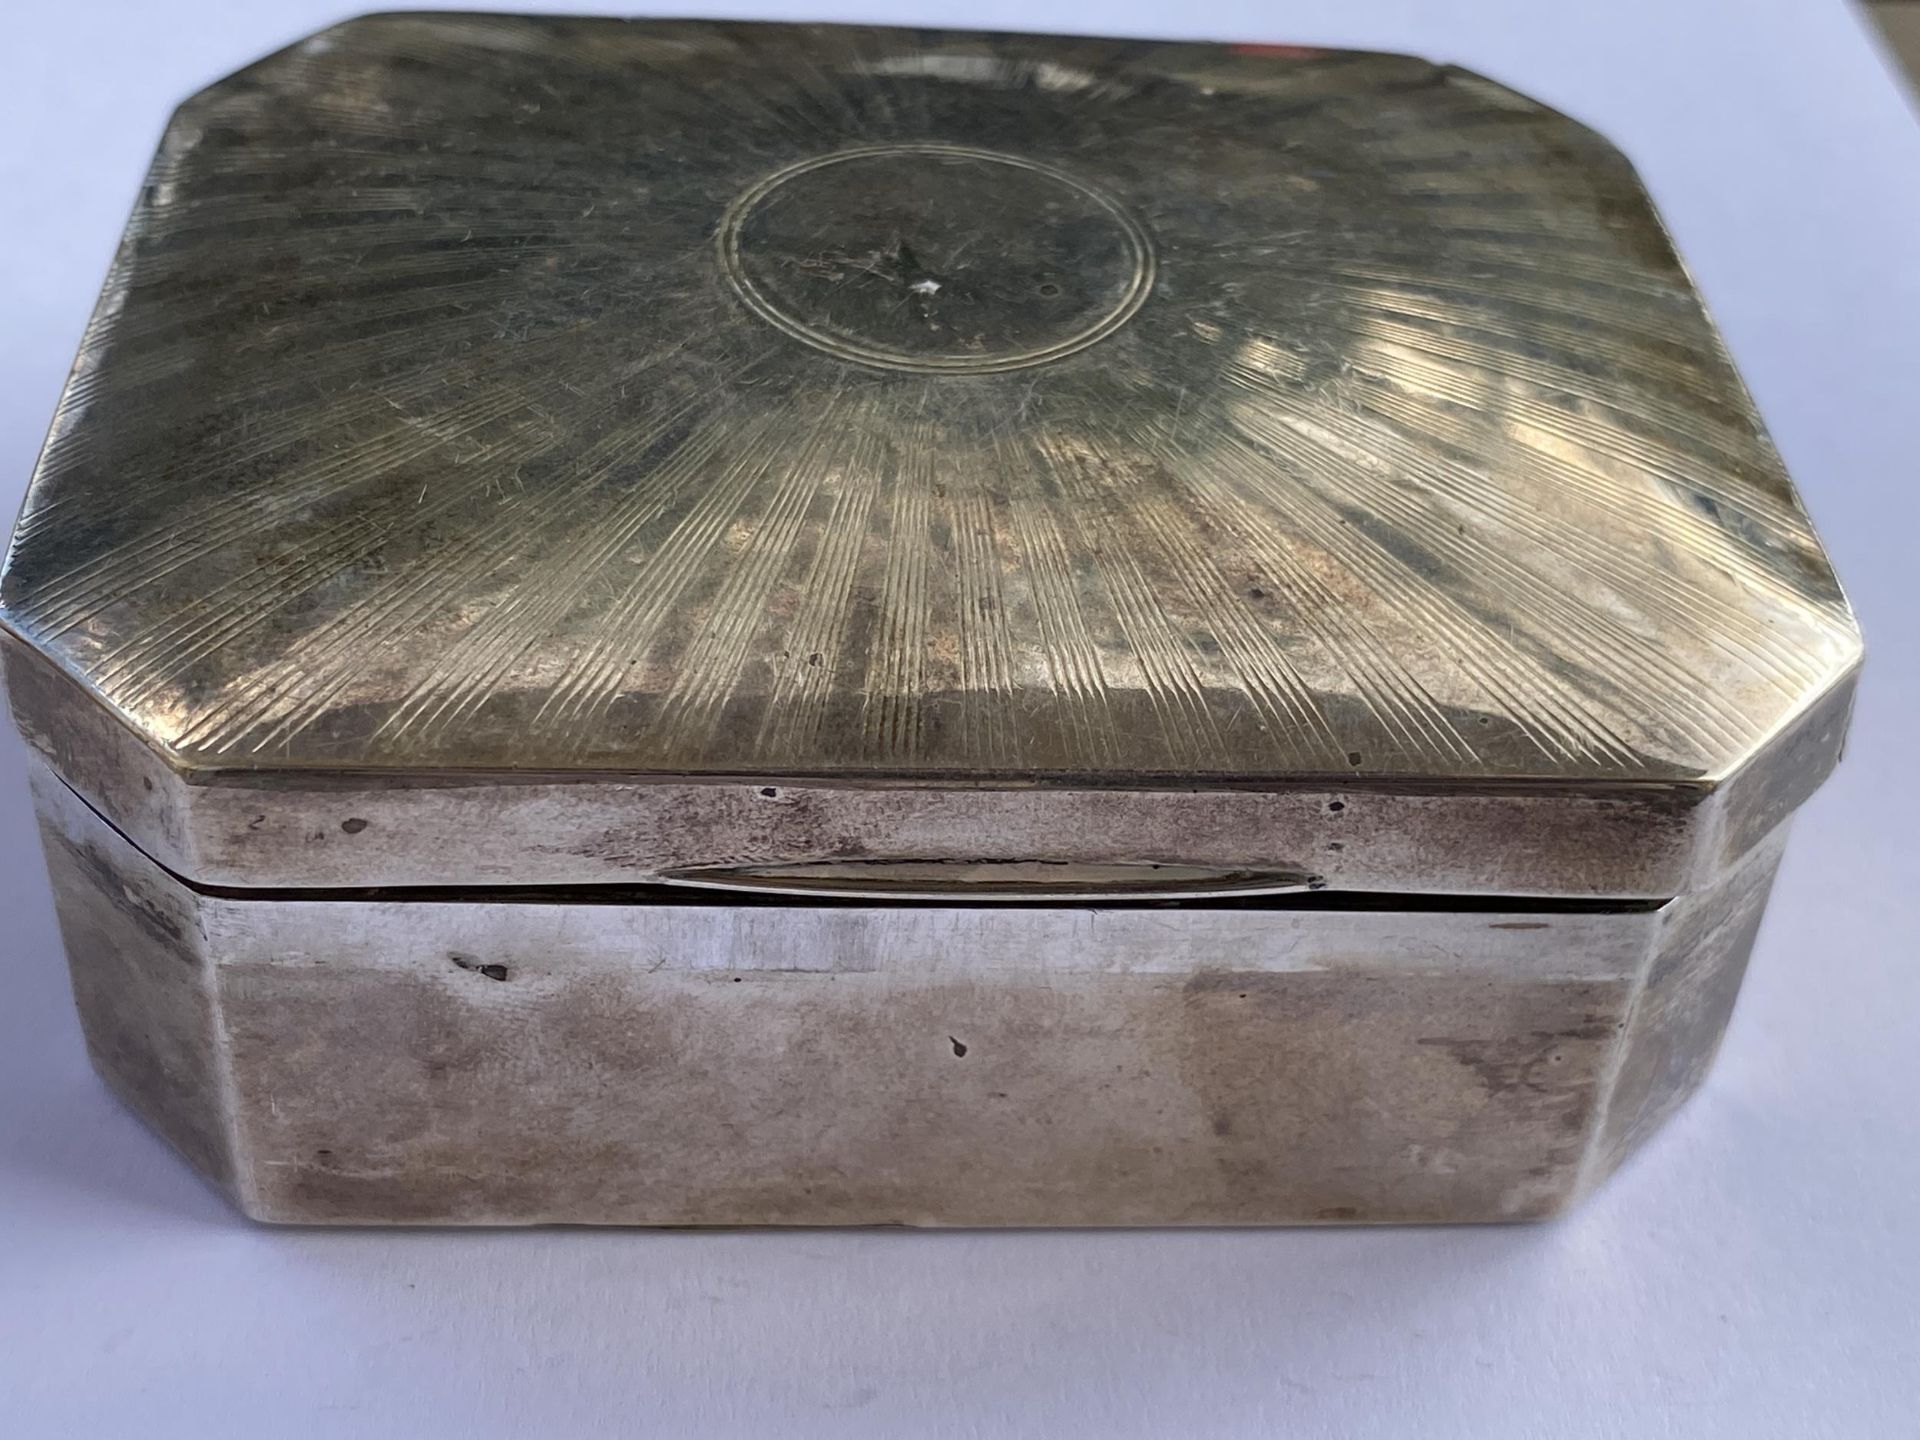 AN ART DECO HALLMARKED SILVER CIGARETTE BOX WITH WOOD LINING, GROSS WEIGHT 249 GRAMS - Image 4 of 10